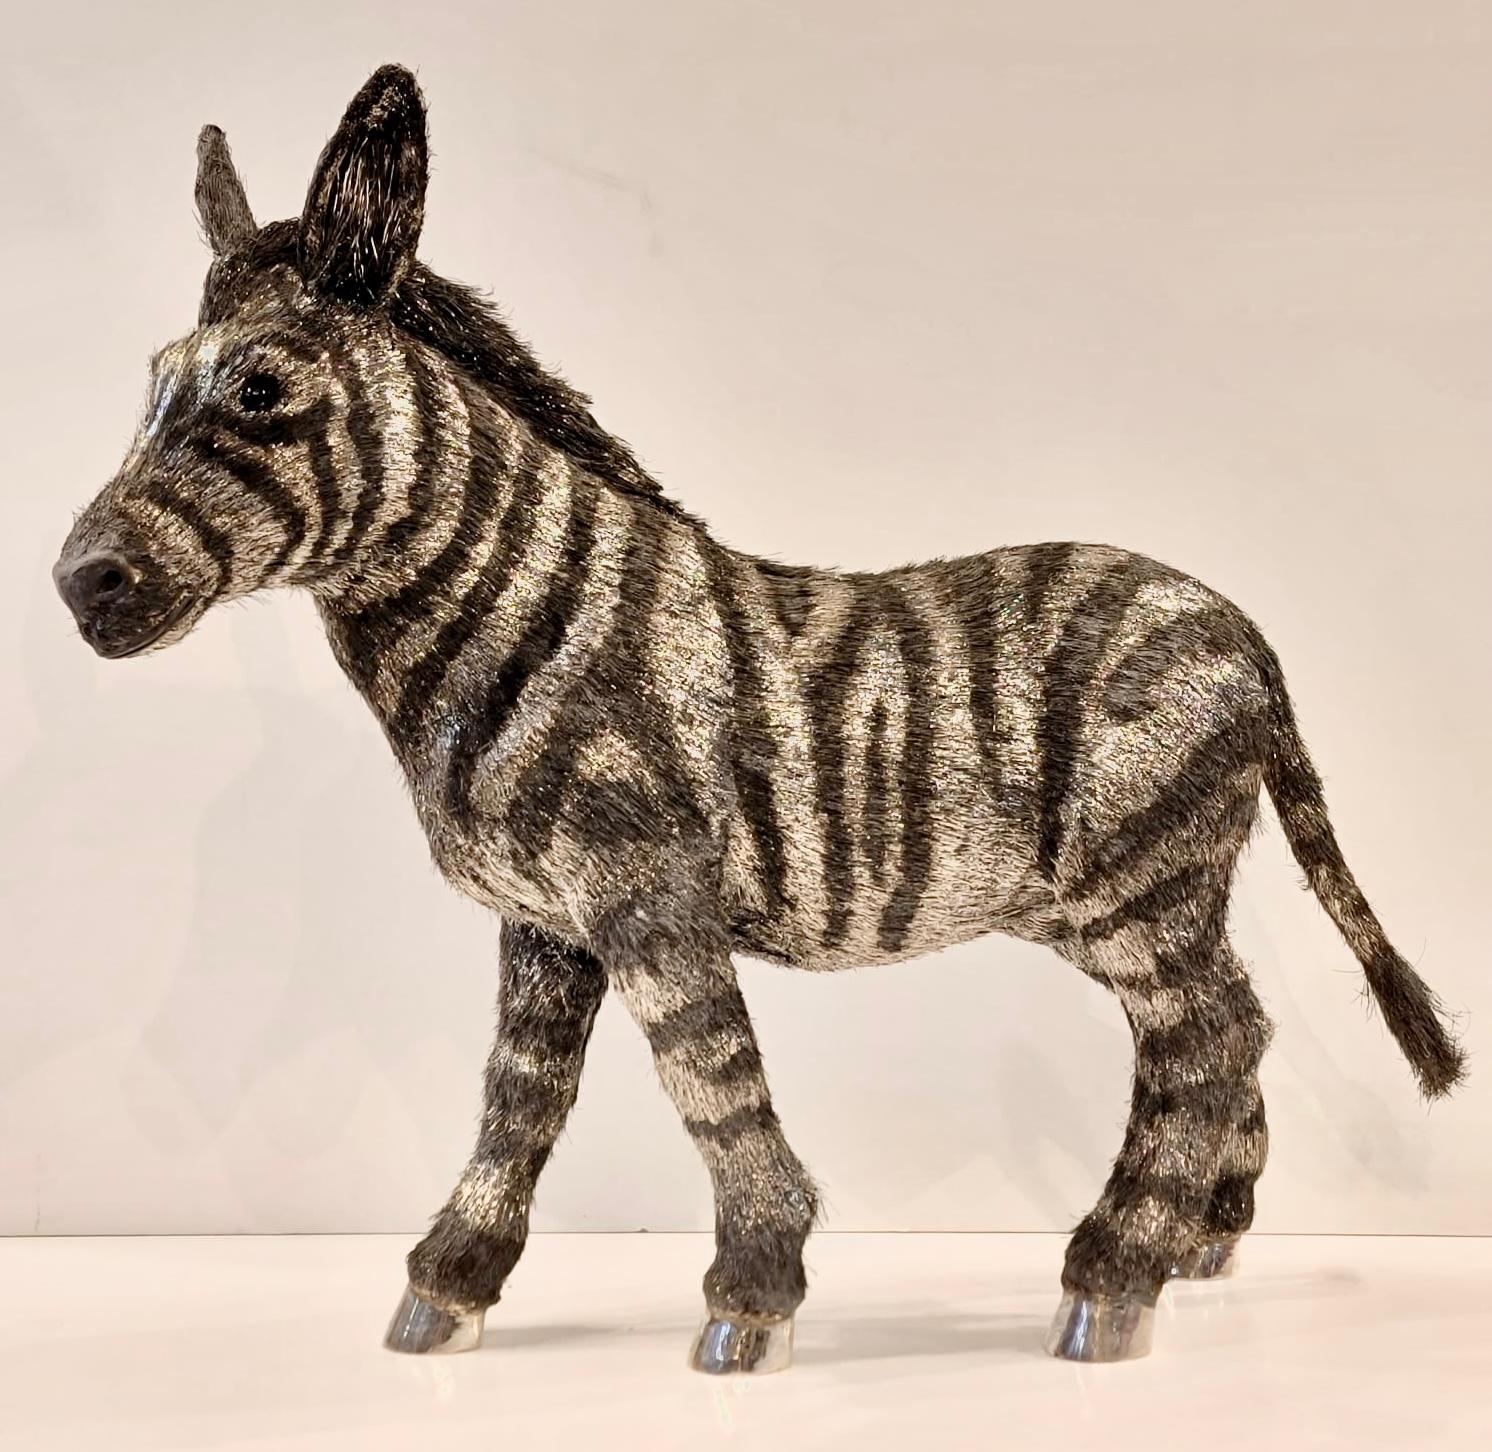 Mario Buccellati life size silver Zebra. A life-size silver zebra crafted with a technique know as ‘lavorazione a pelo’ or ‘hair-like workmanship. This technique involved infinite silver filaments of varying length and thickness being welded to